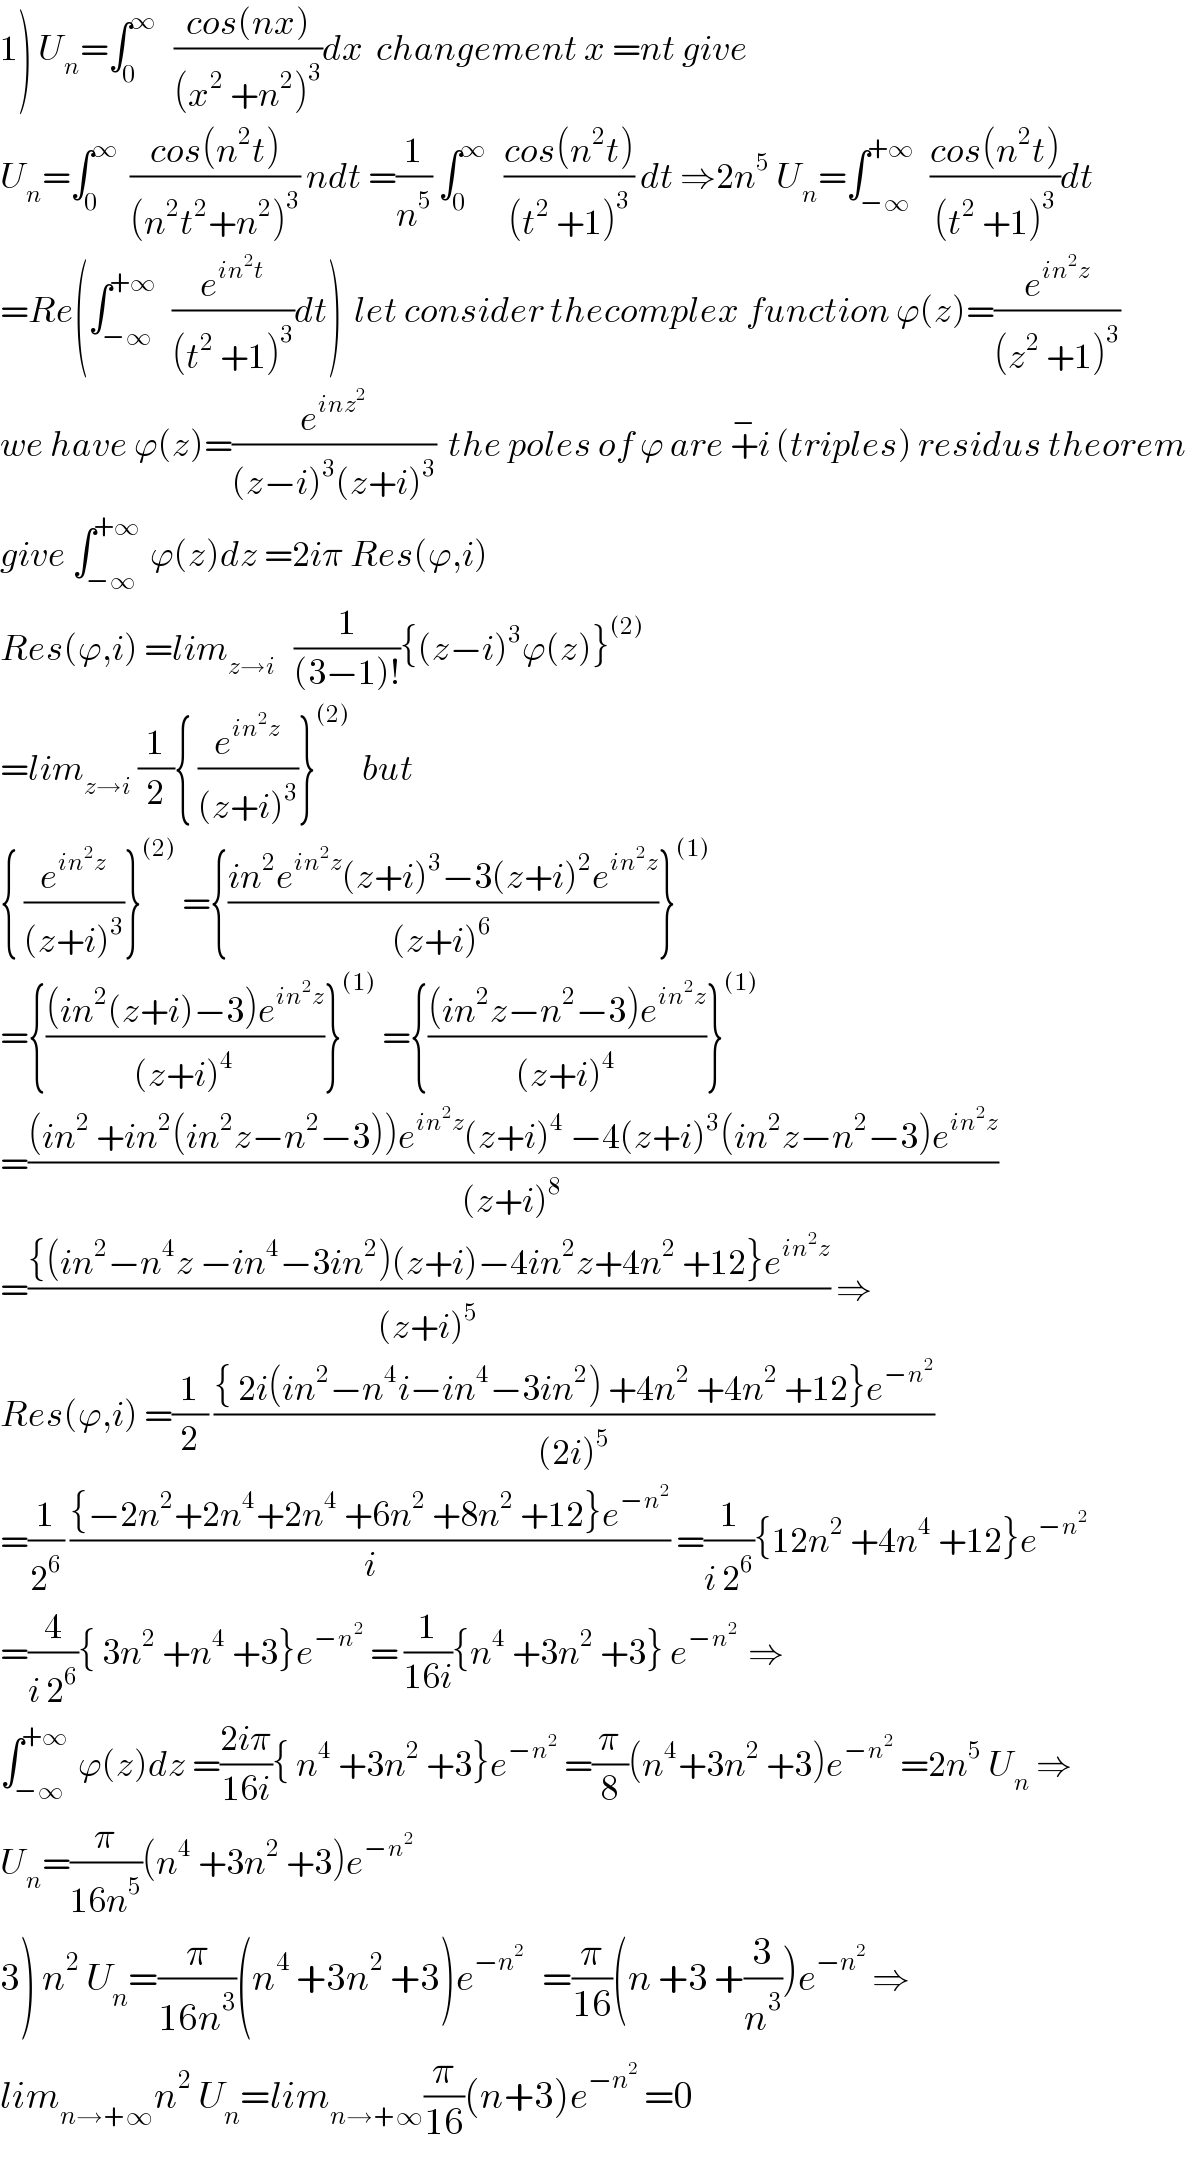 1) U_n =∫_0 ^∞    ((cos(nx))/((x^2  +n^2 )^3 ))dx  changement x =nt give  U_n =∫_0 ^∞   ((cos(n^2 t))/((n^2 t^2 +n^2 )^3 )) ndt =(1/n^5 ) ∫_0 ^∞    ((cos(n^2 t))/((t^2  +1)^3 )) dt ⇒2n^5  U_n =∫_(−∞) ^(+∞)   ((cos(n^2 t))/((t^2  +1)^3 ))dt  =Re(∫_(−∞) ^(+∞)   (e^(in^2 t) /((t^2  +1)^3 ))dt)  let consider thecomplex function ϕ(z)=(e^(in^2 z) /((z^2  +1)^3 ))  we have ϕ(z)=(e^(inz^2 ) /((z−i)^3 (z+i)^3 ))  the poles of ϕ are +^− i (triples) residus theorem  give ∫_(−∞) ^(+∞)  ϕ(z)dz =2iπ Res(ϕ,i)  Res(ϕ,i) =lim_(z→i)    (1/((3−1)!)){(z−i)^3 ϕ(z)}^((2))   =lim_(z→i)  (1/2){ (e^(in^2 z) /((z+i)^3 ))}^((2))   but  { (e^(in^2 z) /((z+i)^3 ))}^((2))  ={((in^2 e^(in^2 z) (z+i)^3 −3(z+i)^2 e^(in^2 z) )/((z+i)^6 ))}^((1))   ={(((in^2 (z+i)−3)e^(in^2 z) )/((z+i)^4 ))}^((1))  ={(((in^2 z−n^2 −3)e^(in^2 z) )/((z+i)^4 ))}^((1))   =(((in^2  +in^2 (in^2 z−n^2 −3))e^(in^2 z) (z+i)^4  −4(z+i)^3 (in^2 z−n^2 −3)e^(in^2 z) )/((z+i)^8 ))  =(({(in^2 −n^4 z −in^4 −3in^2 )(z+i)−4in^2 z+4n^2  +12}e^(in^2 z) )/((z+i)^5 )) ⇒  Res(ϕ,i) =(1/2) (({ 2i(in^2 −n^4 i−in^4 −3in^2 ) +4n^2  +4n^2  +12}e^(−n^2 ) )/((2i)^5 ))  =(1/2^6 ) (({−2n^2 +2n^4 +2n^4  +6n^2  +8n^2  +12}e^(−n^2 ) )/i) =(1/(i 2^6 )){12n^2  +4n^4  +12}e^(−n^2 )   =(4/(i 2^6 )){ 3n^2  +n^4  +3}e^(−n^2 )  = (1/(16i)){n^4  +3n^2  +3} e^(−n^2  )  ⇒  ∫_(−∞) ^(+∞)  ϕ(z)dz =((2iπ)/(16i)){ n^4  +3n^2  +3}e^(−n^2 )  =(π/8)(n^4 +3n^2  +3)e^(−n^2 )  =2n^5  U_n  ⇒  U_n =(π/(16n^5 ))(n^4  +3n^2  +3)e^(−n^2 )   3) n^2  U_n =(π/(16n^3 ))(n^4  +3n^2  +3)e^(−n^2 )    =(π/(16))(n +3 +(3/n^3 ))e^(−n^2 )  ⇒  lim_(n→+∞) n^2  U_n =lim_(n→+∞) (π/(16))(n+3)e^(−n^2 )  =0  